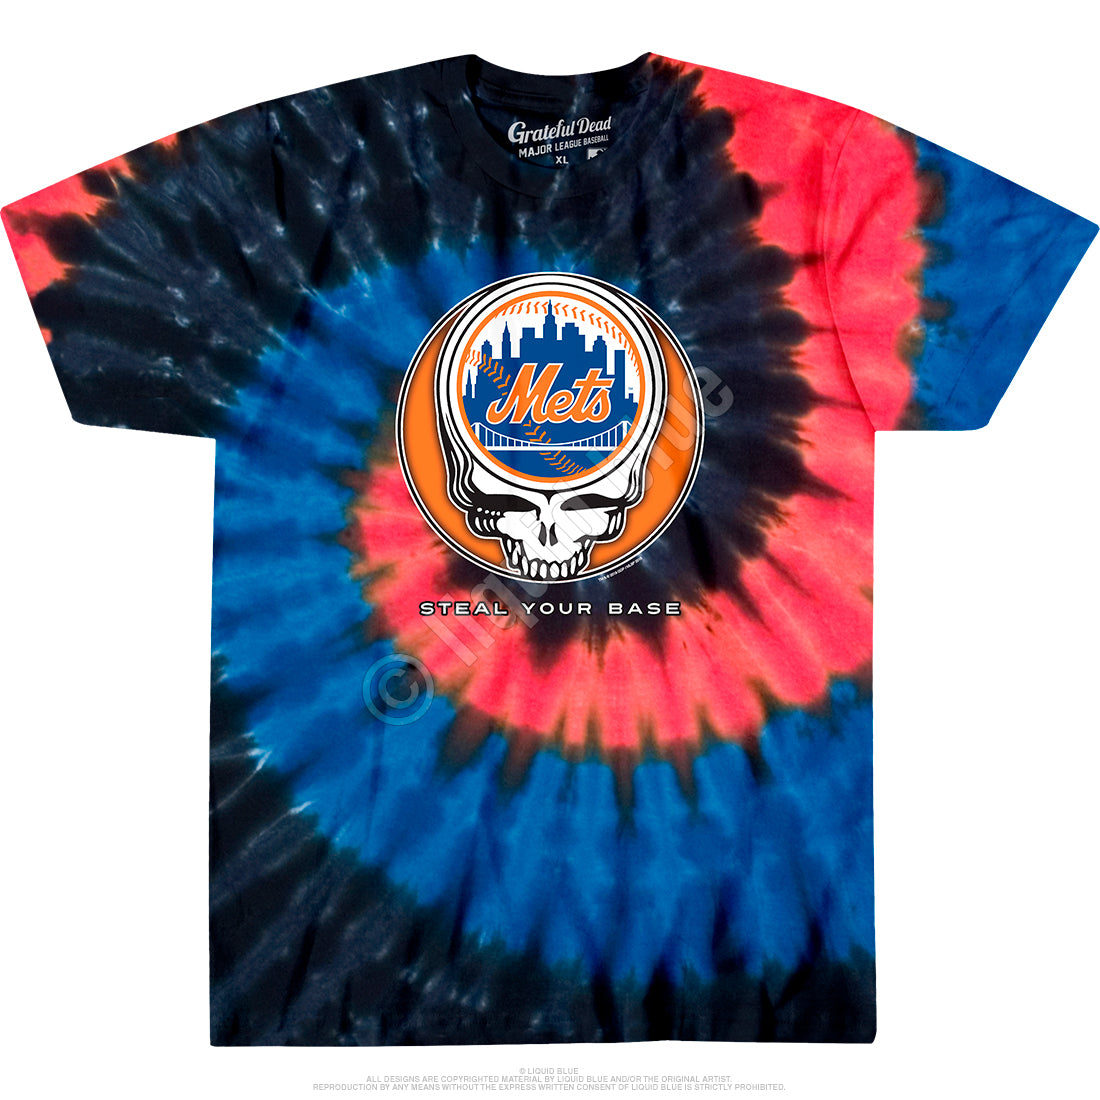 Grateful Dead New York Mets Steal Your Base Tie-Dye T-Shirt